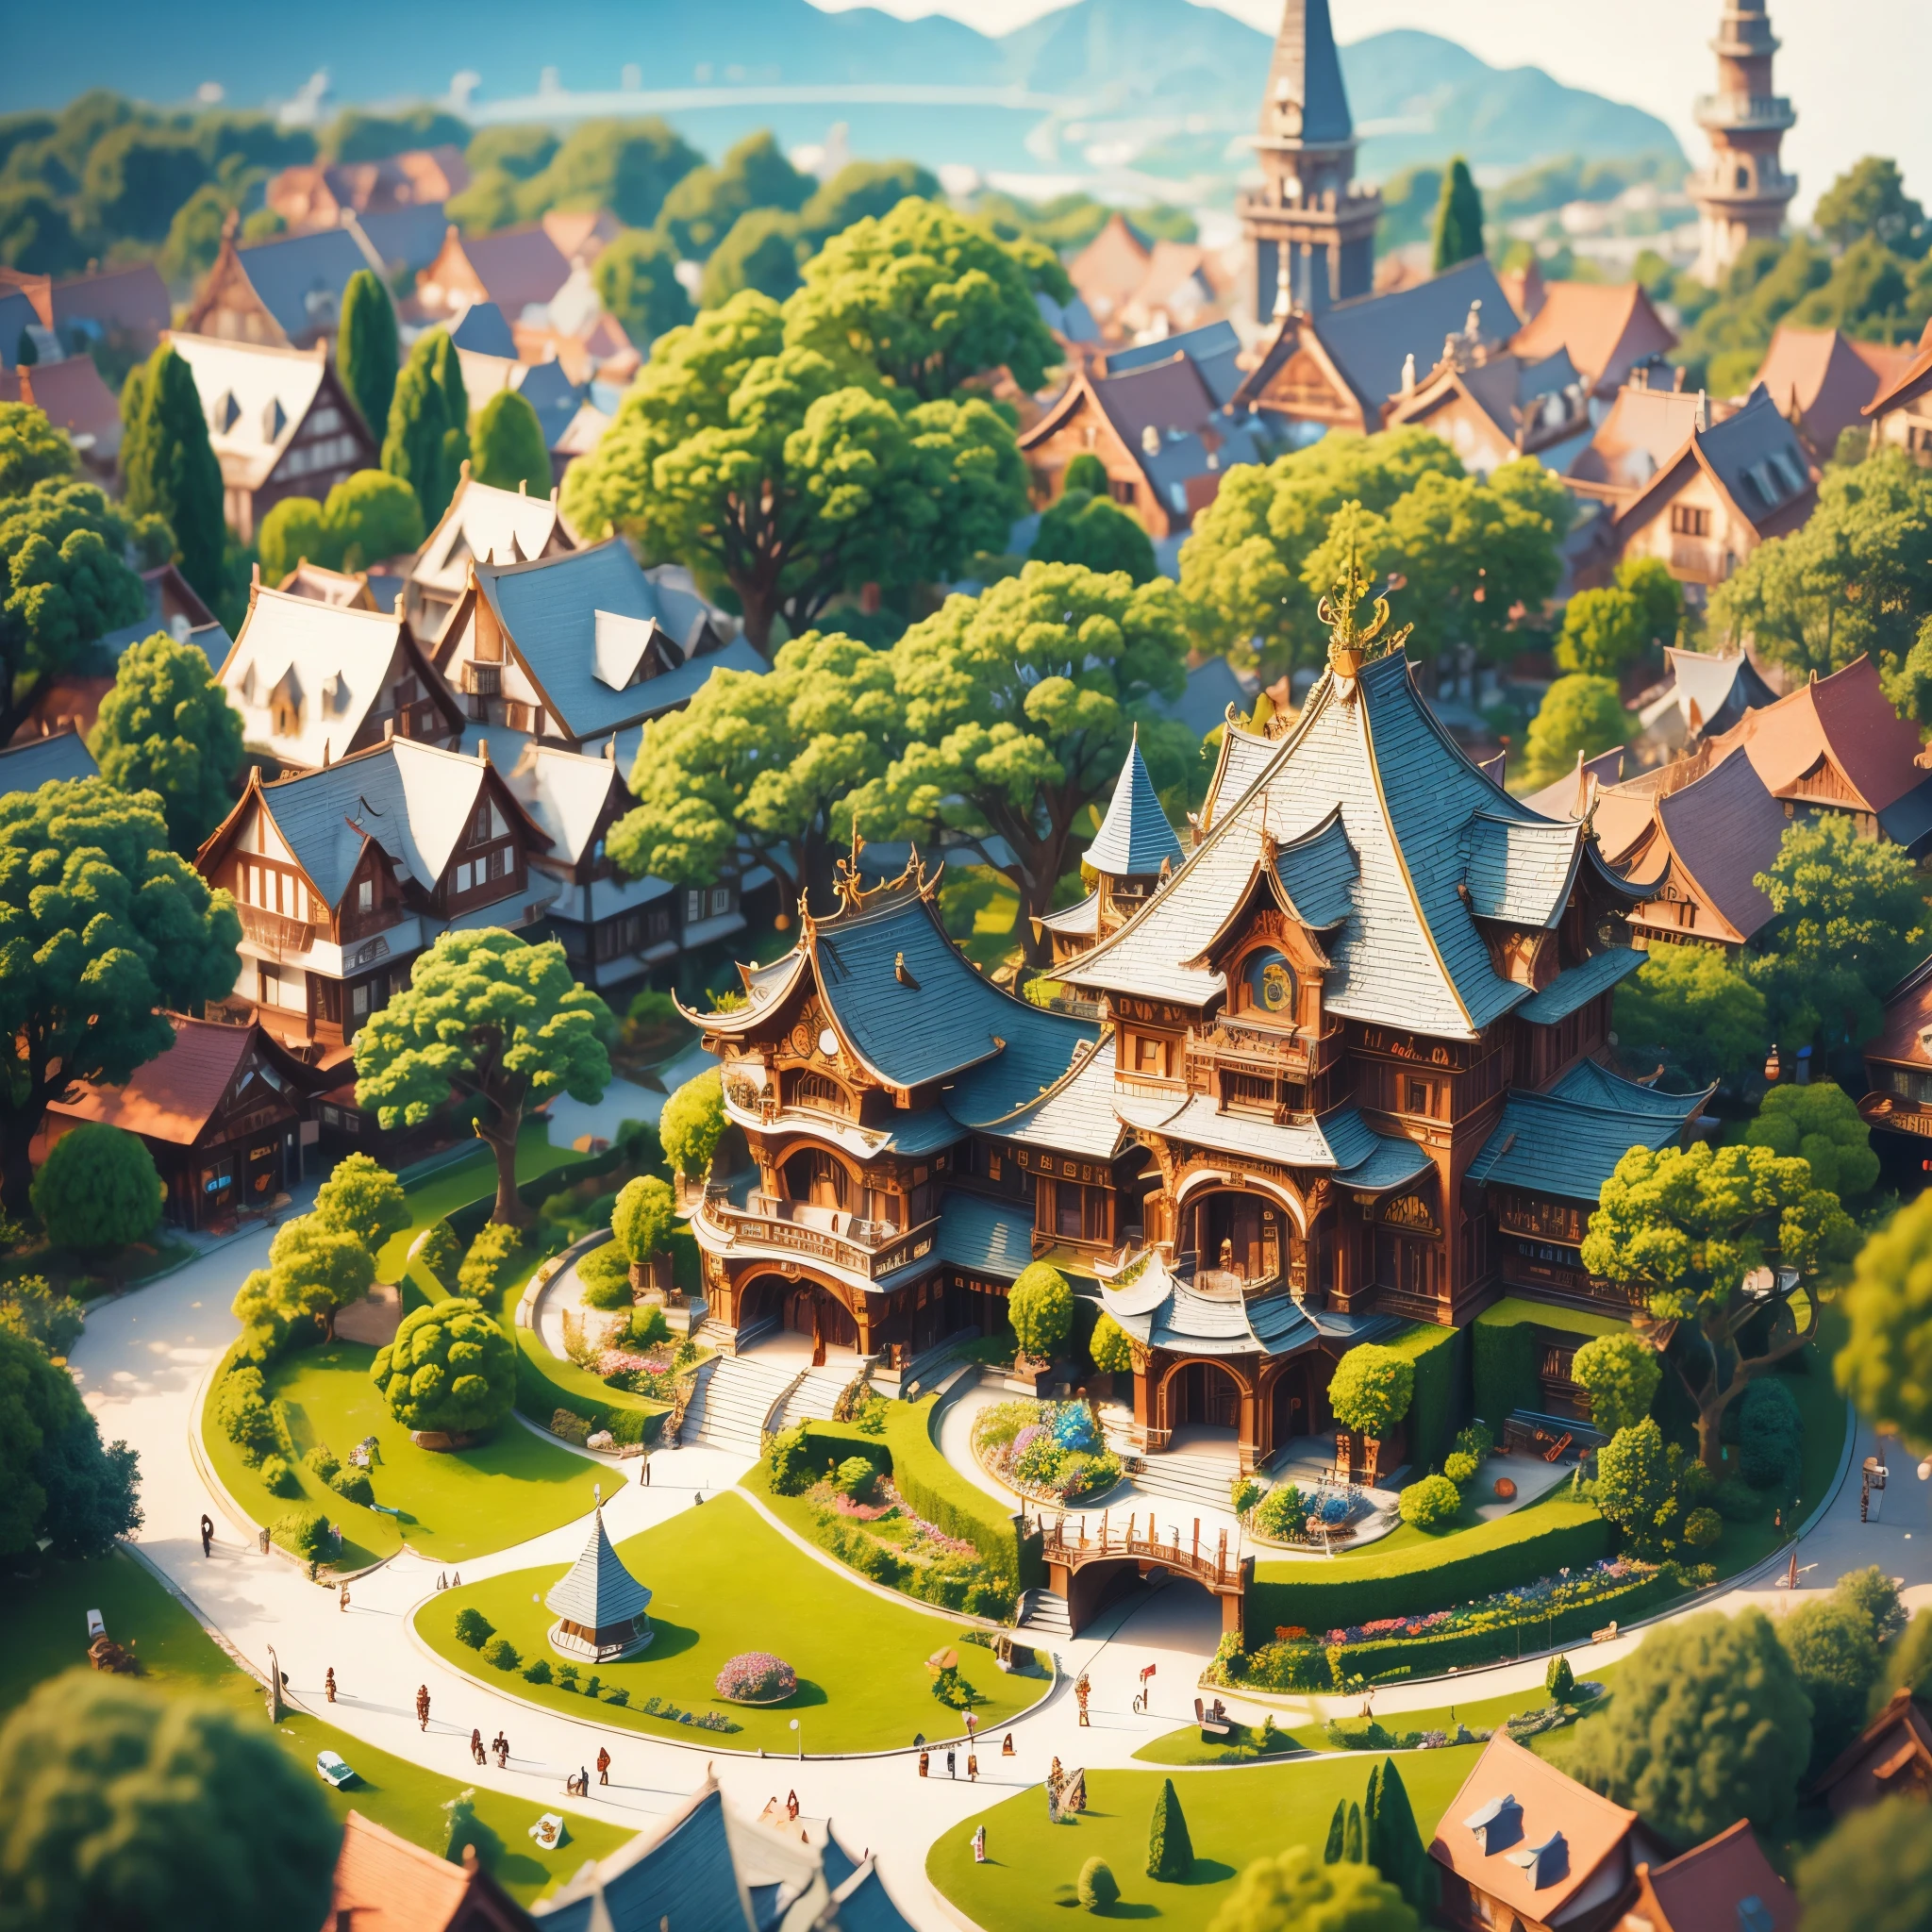 fairy tale_town，miniature， Super Cute clayWorld，isometric vieWof Shanghai
City，Cute clayfreeZe frame animation， Cute OrientalPearl
TVTOWer， City， CarS， peOple， trees，graSS，tilt shift， eXCellent
lighting，Volume， landsCape，brush rendering， 3D，Super detail,